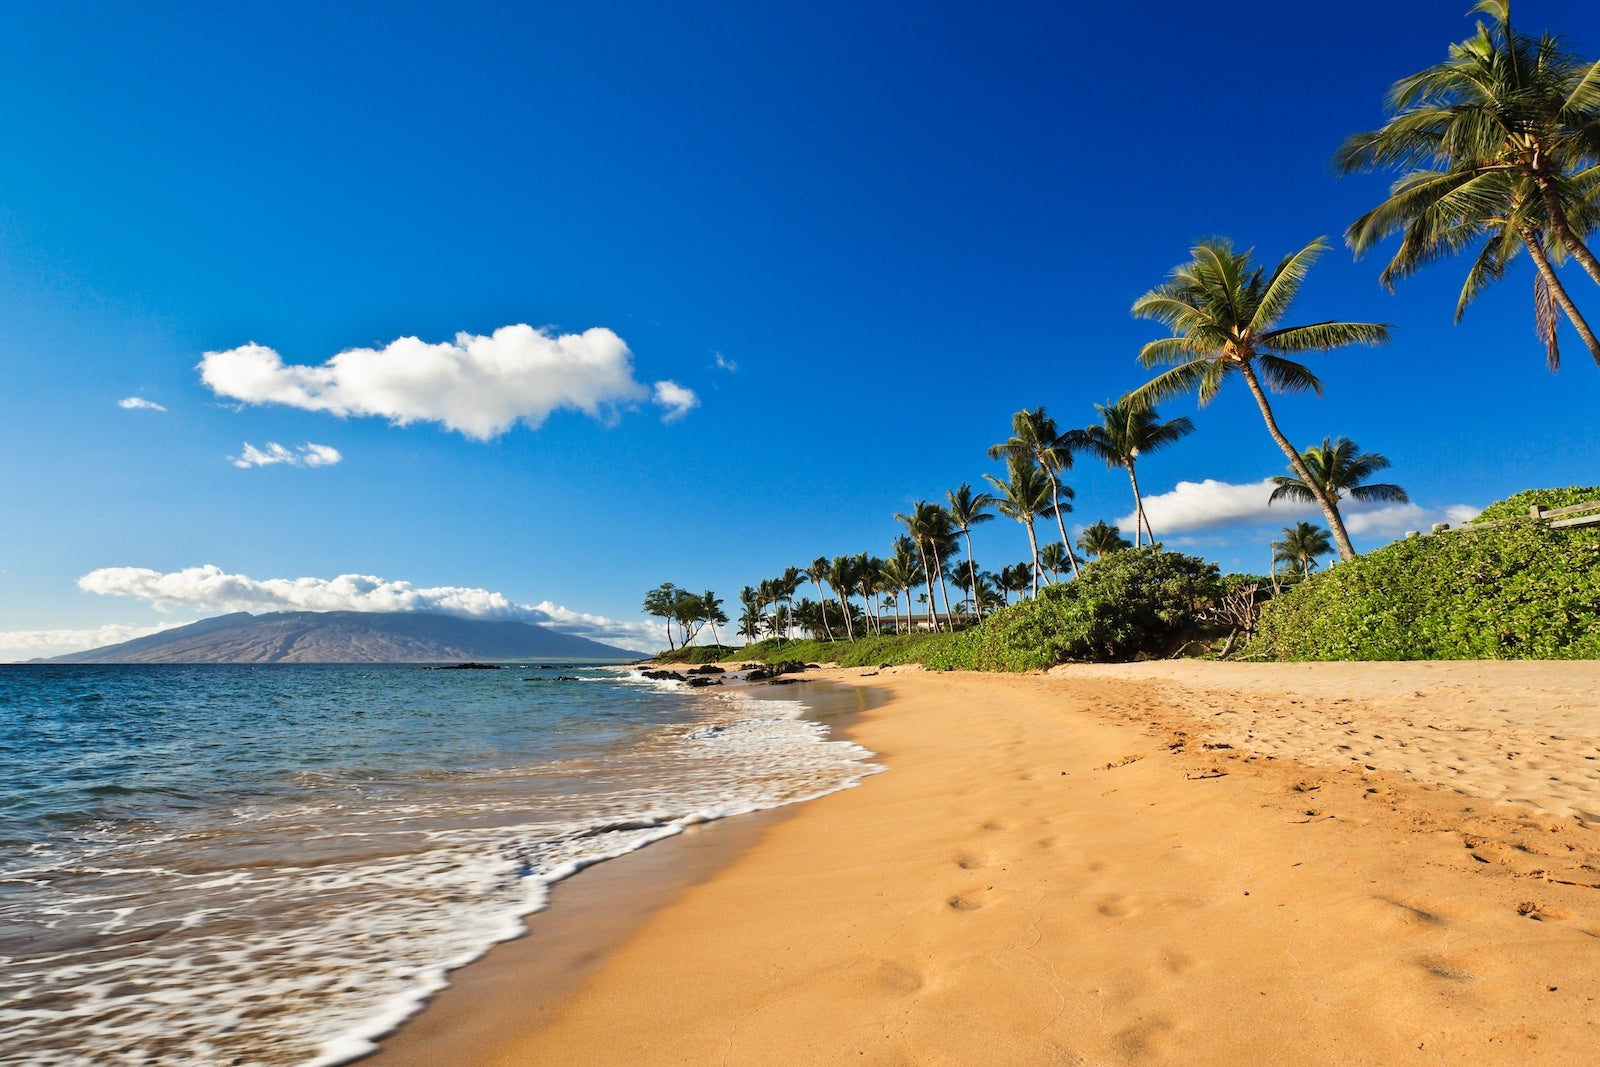 Book today: Alaska Airlines has a 30% off sale on flights to Hawaii, the Bahamas and Belize